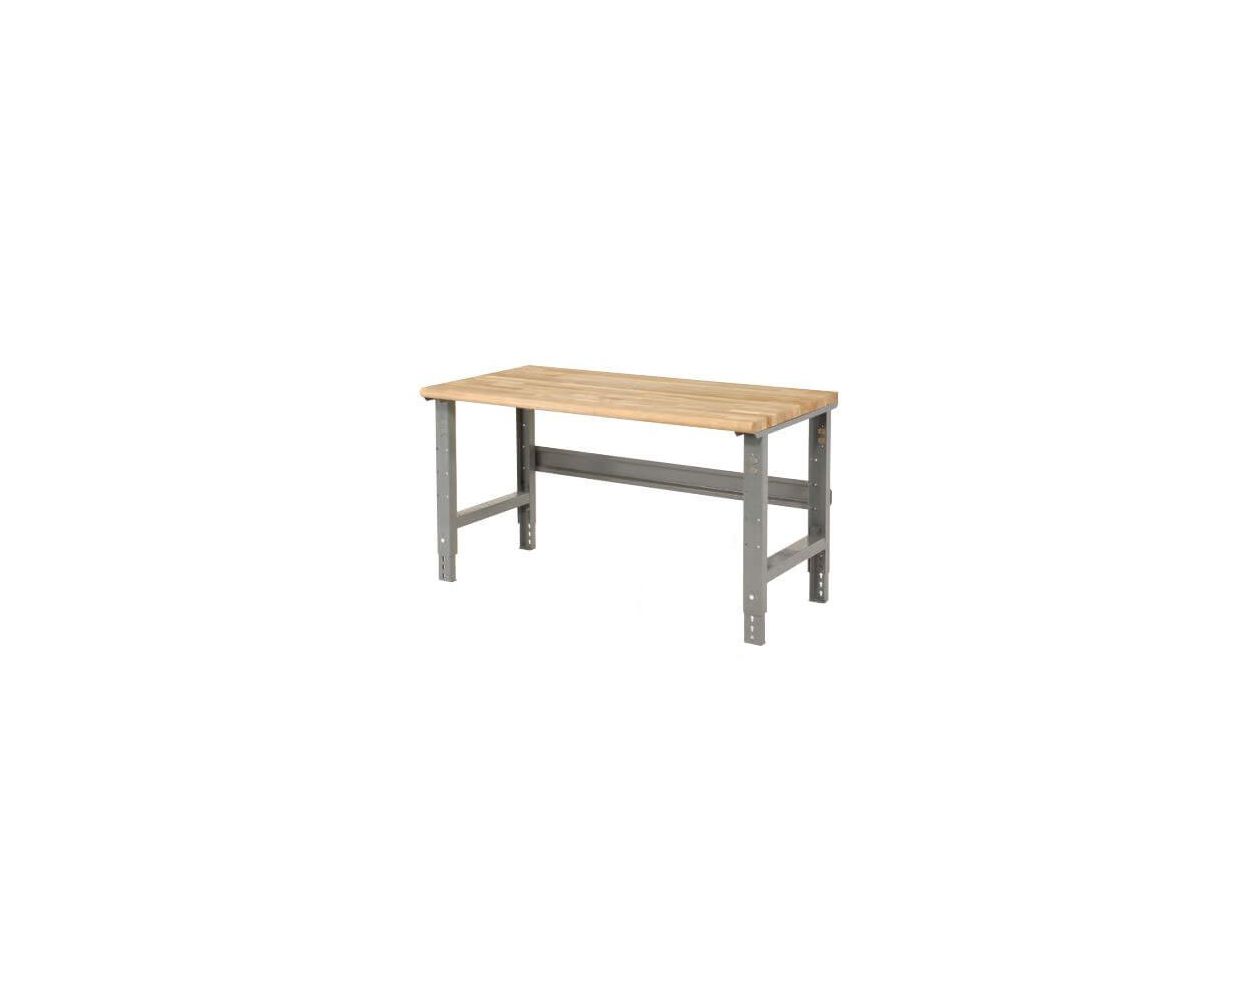 Maple Butcher Block Work Benches With Flared Legs By Omega Products